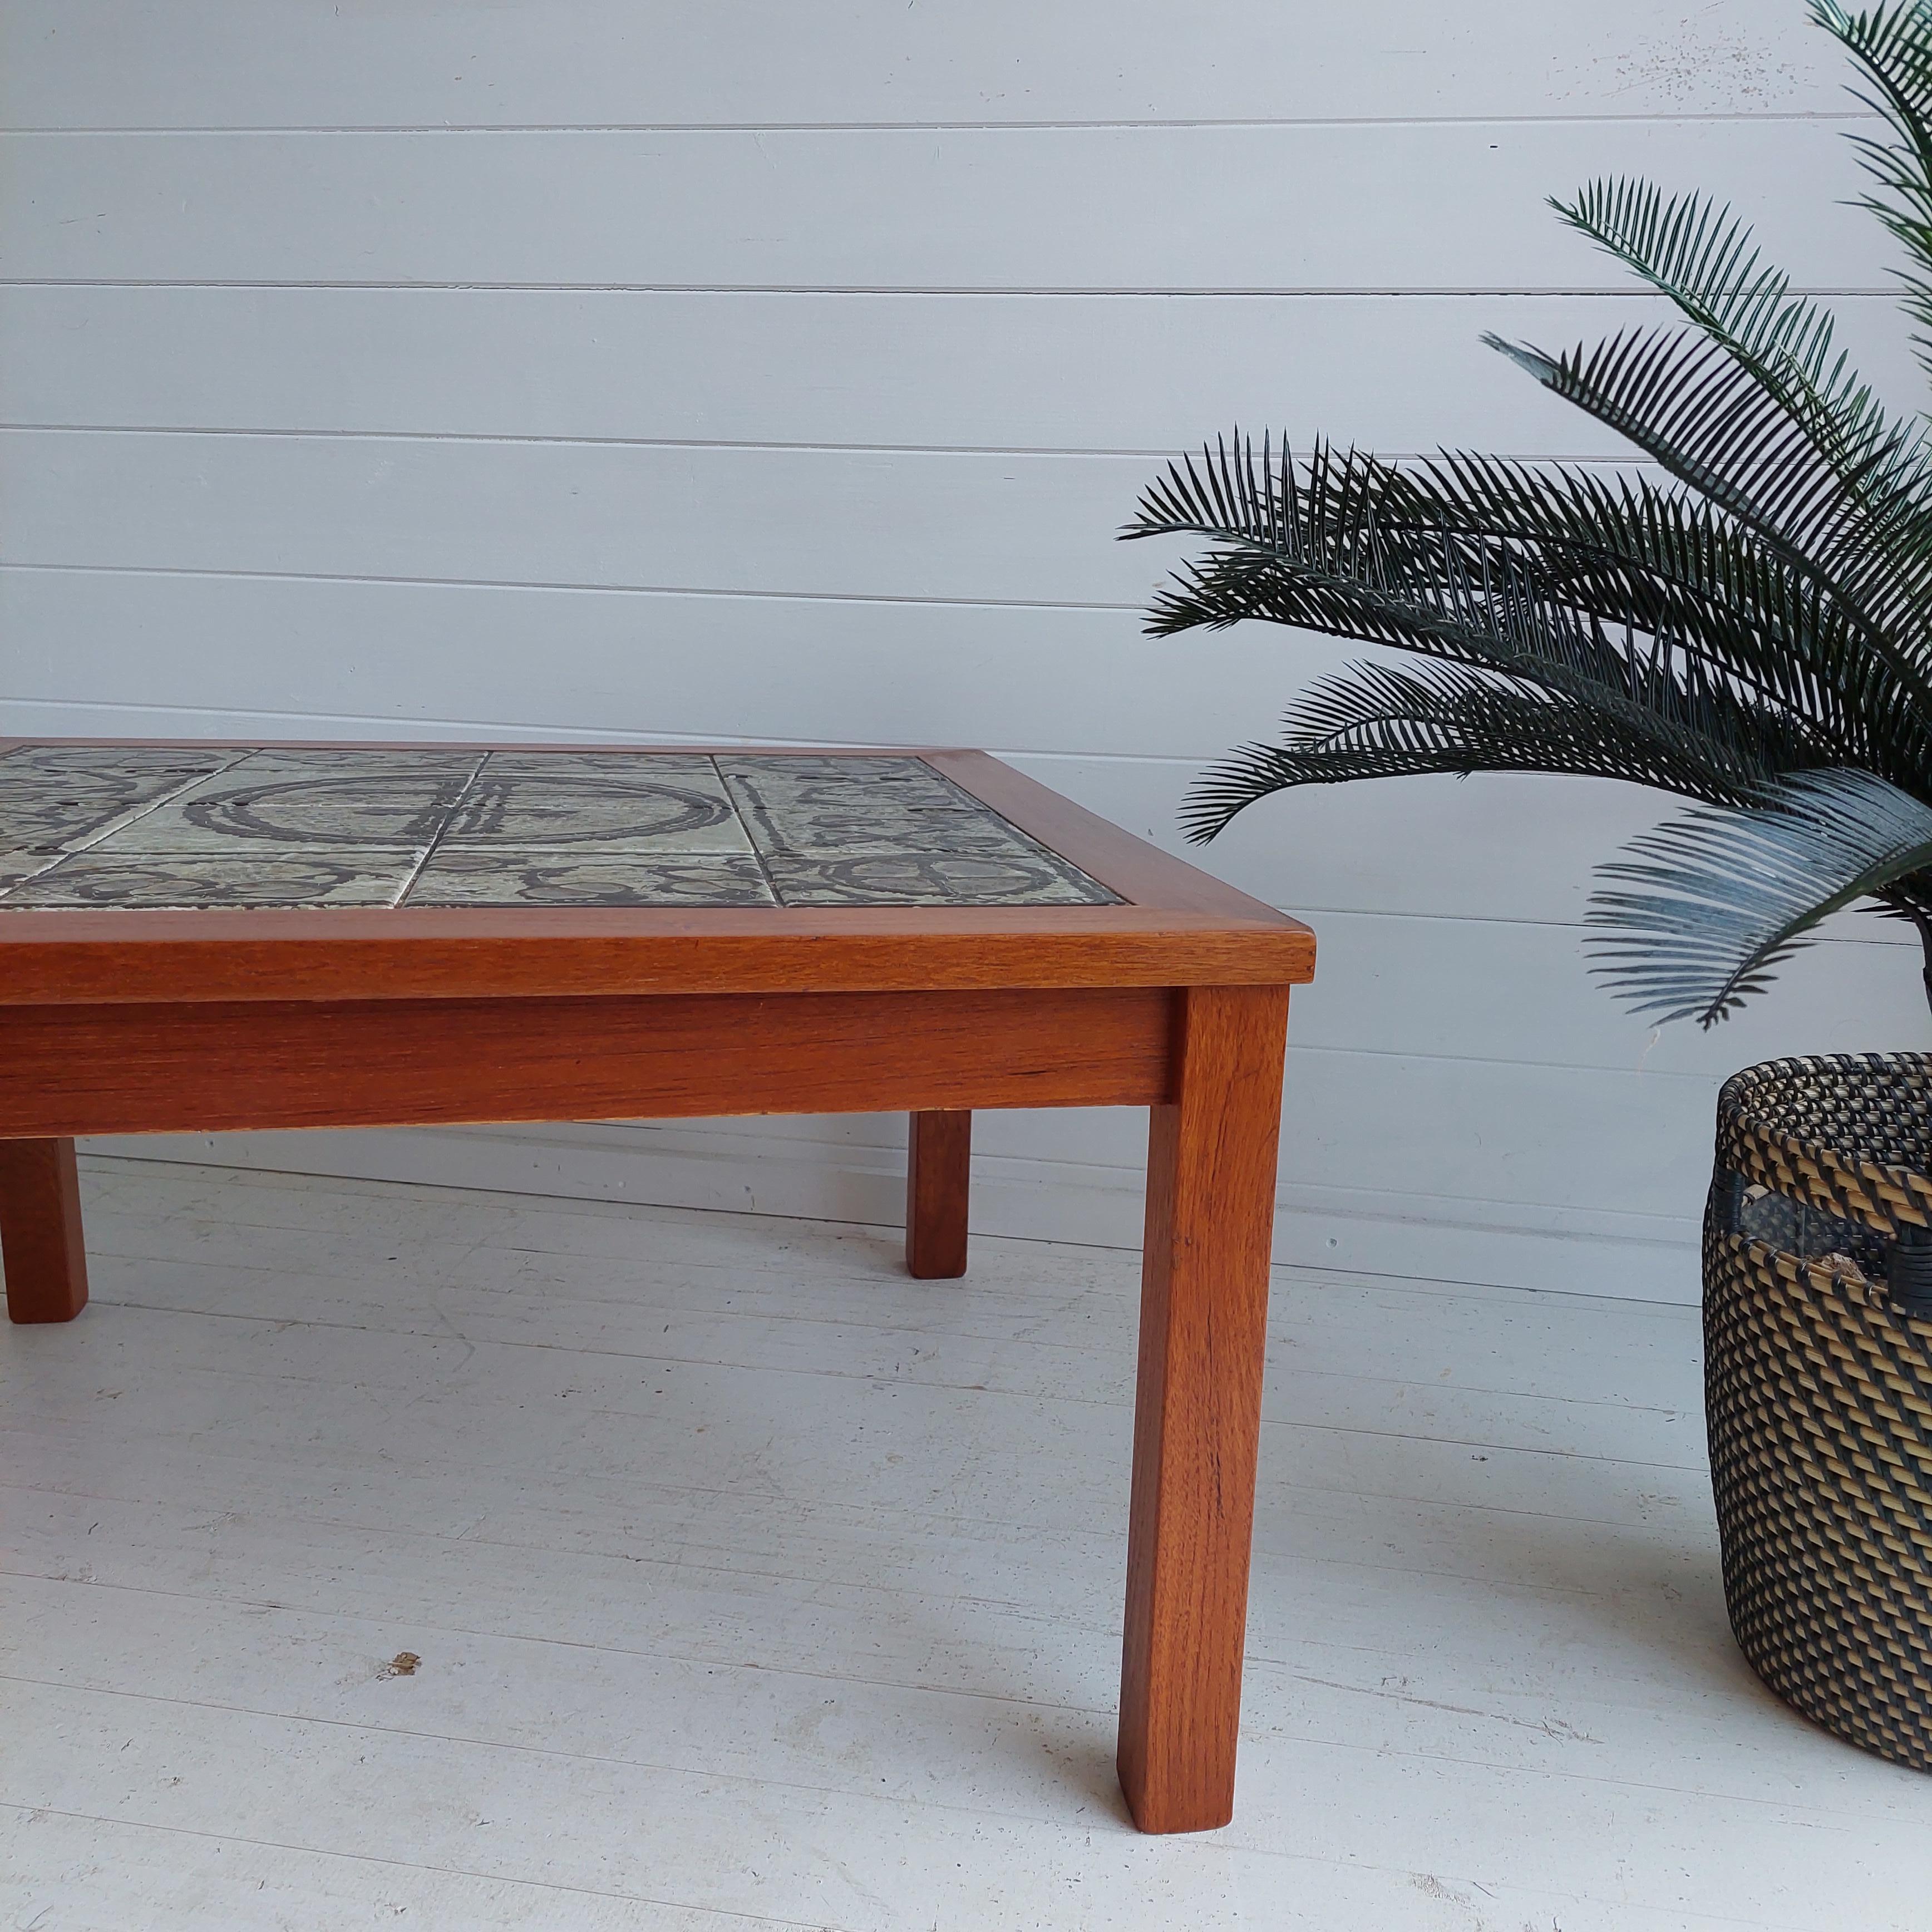 Hand-Crafted Mid Century Danish Ceramic and Teak Coffee Table by Ox Art for Trioh, 1970s For Sale